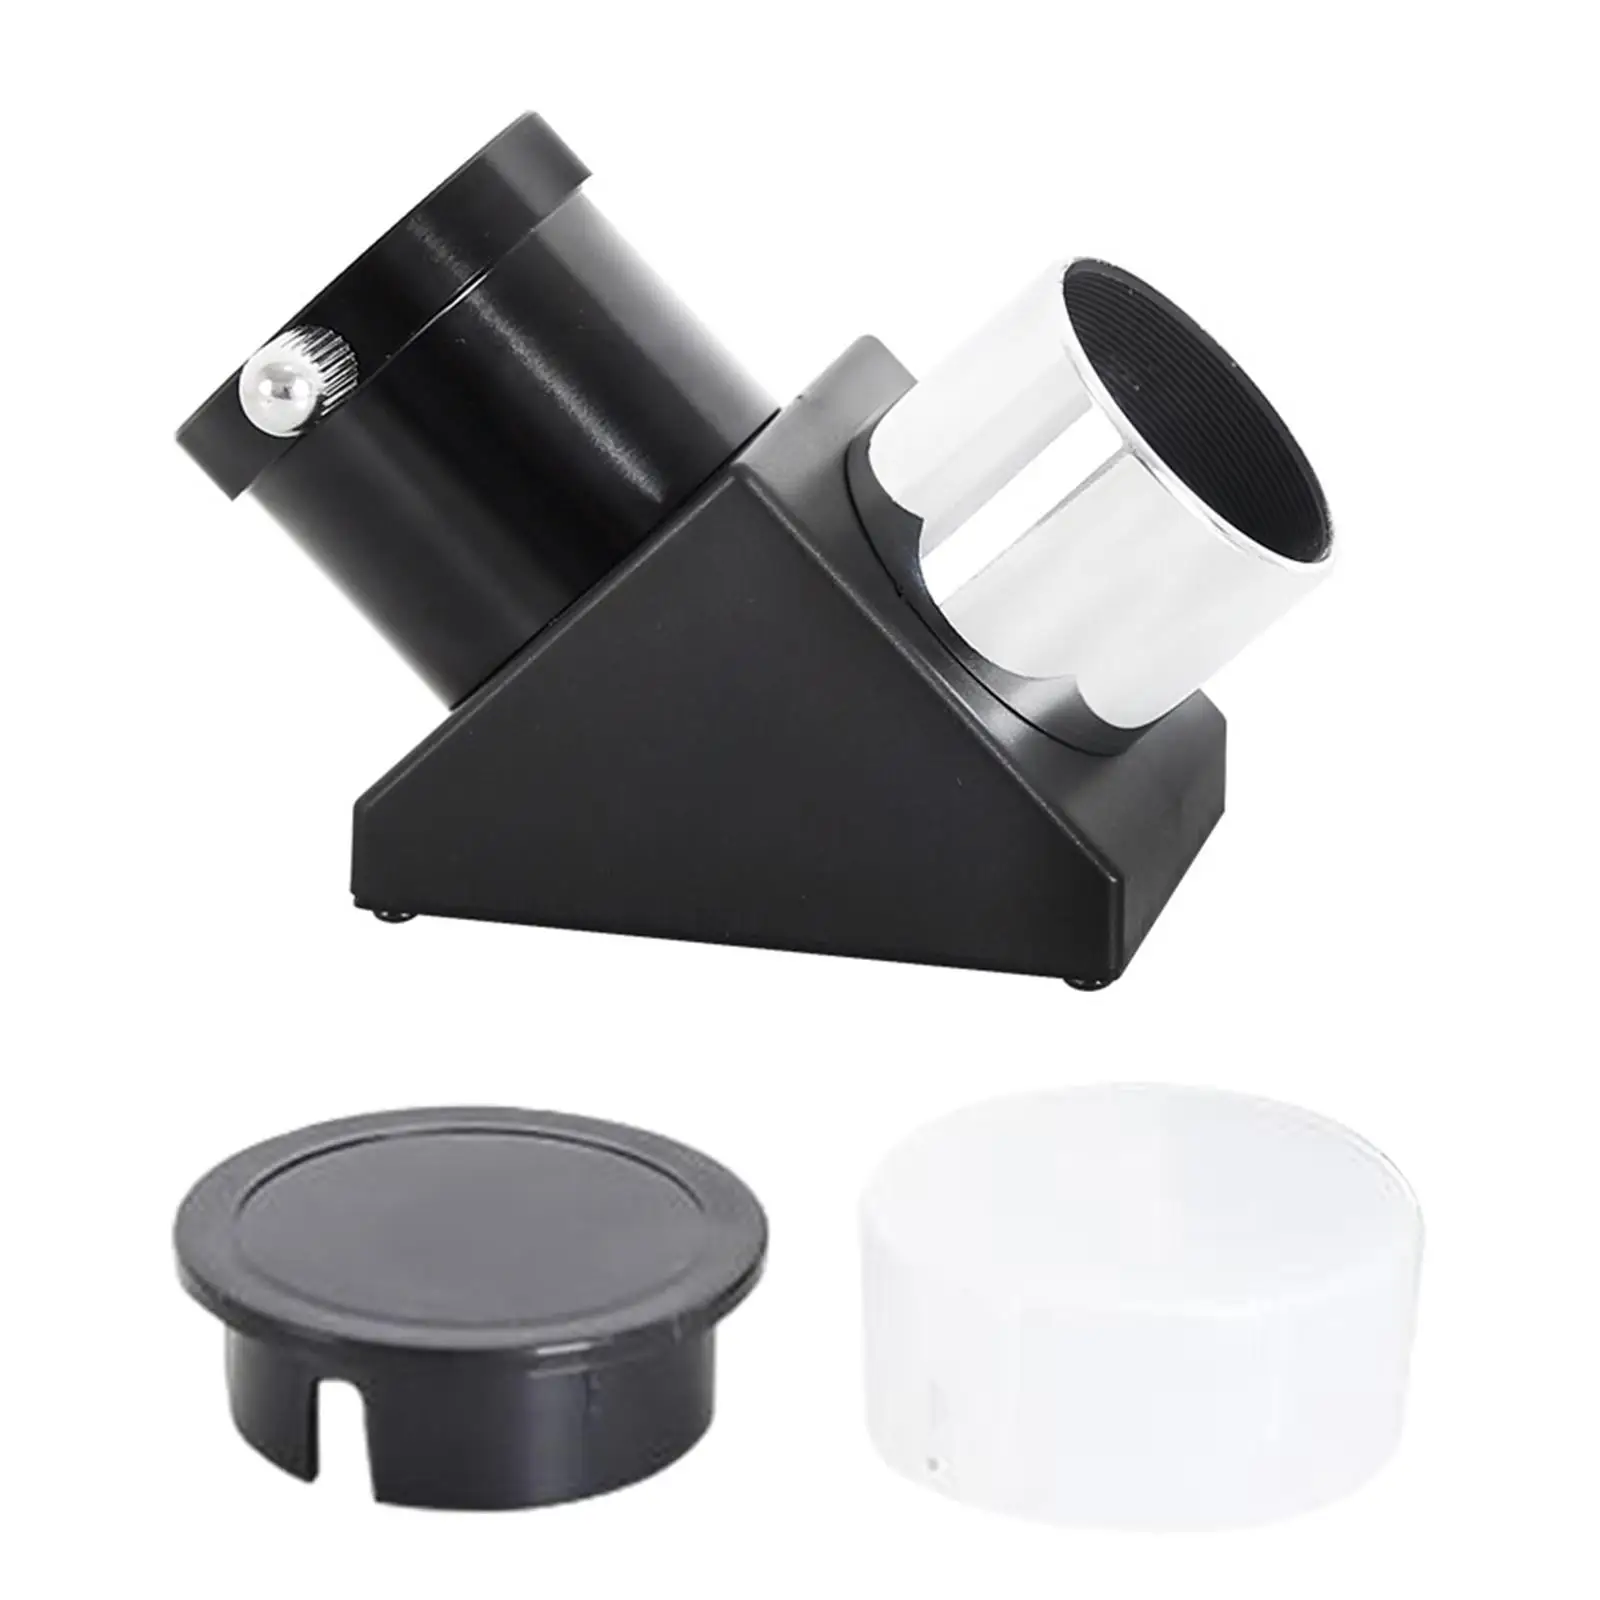 90 Degree Diagonal Mirror Metal Astronomical Telescope Accessories for Astronomical Visual Astrophotography Simple to Install